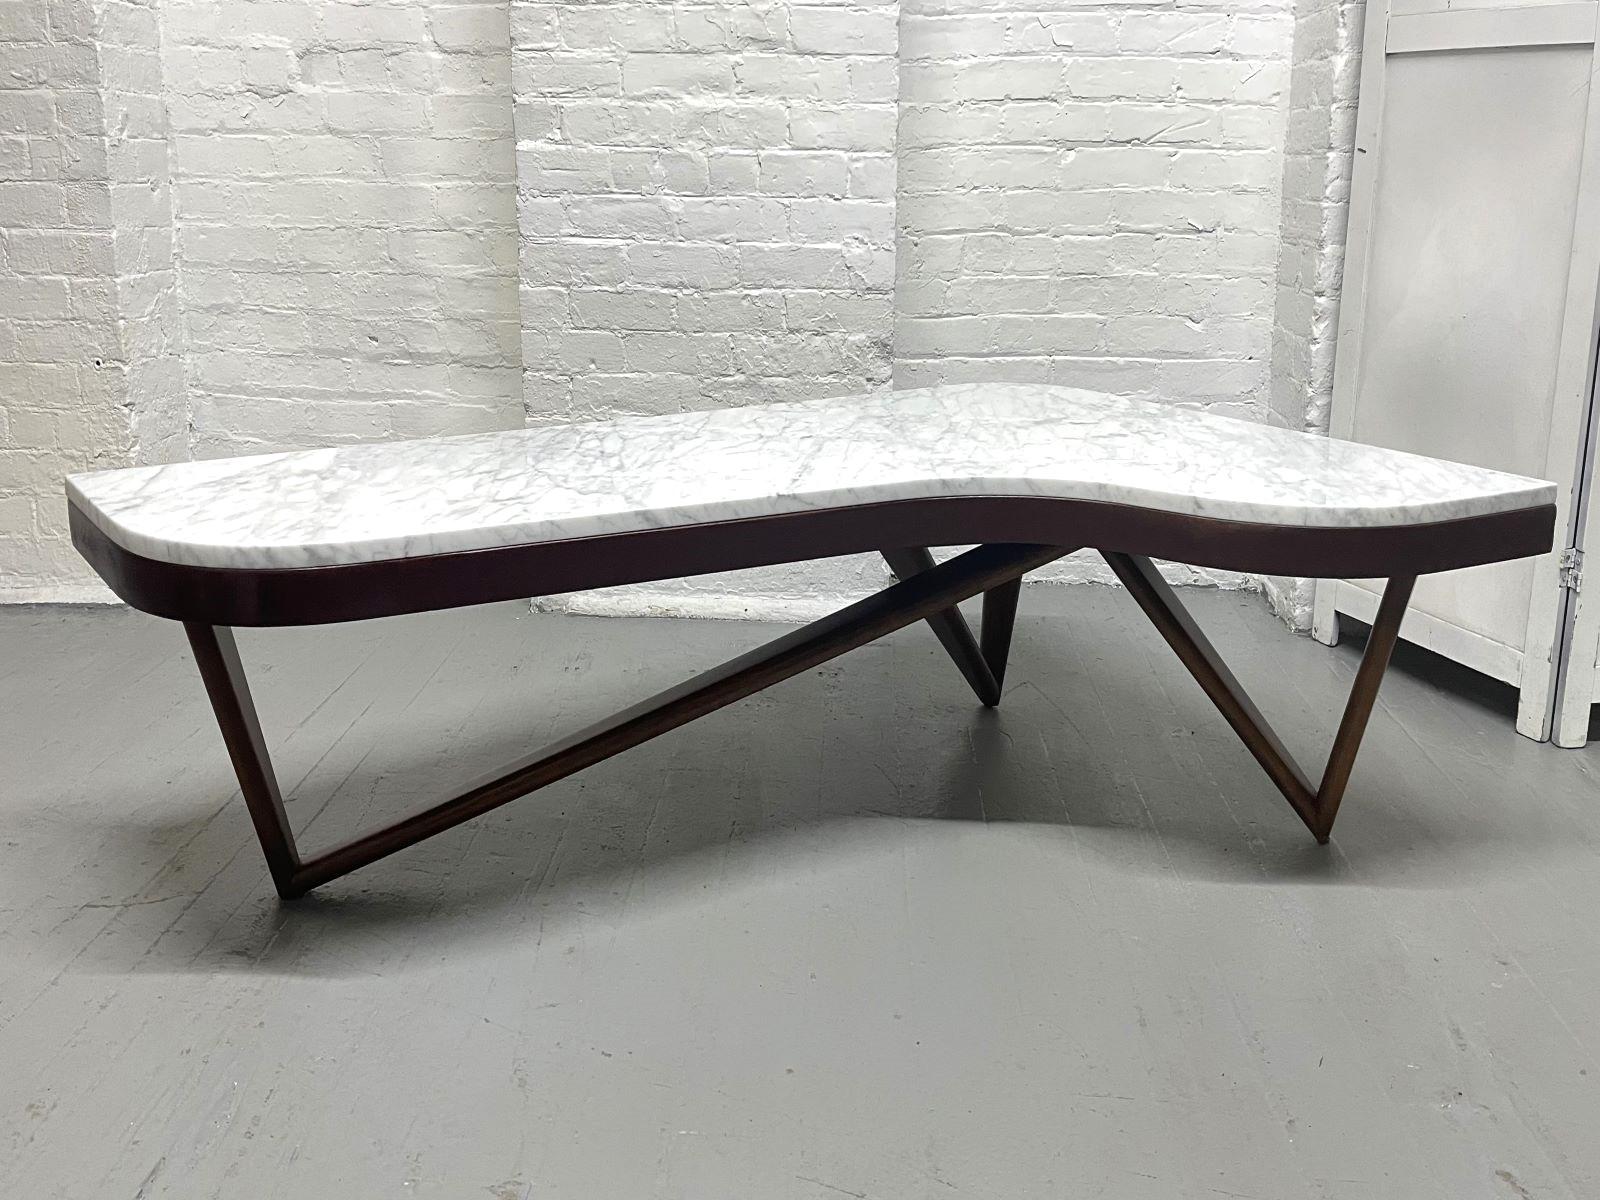 Mid-Century Modern Boomerang shaped coffee table. The table is mahogany with a sculptural base and marble top.